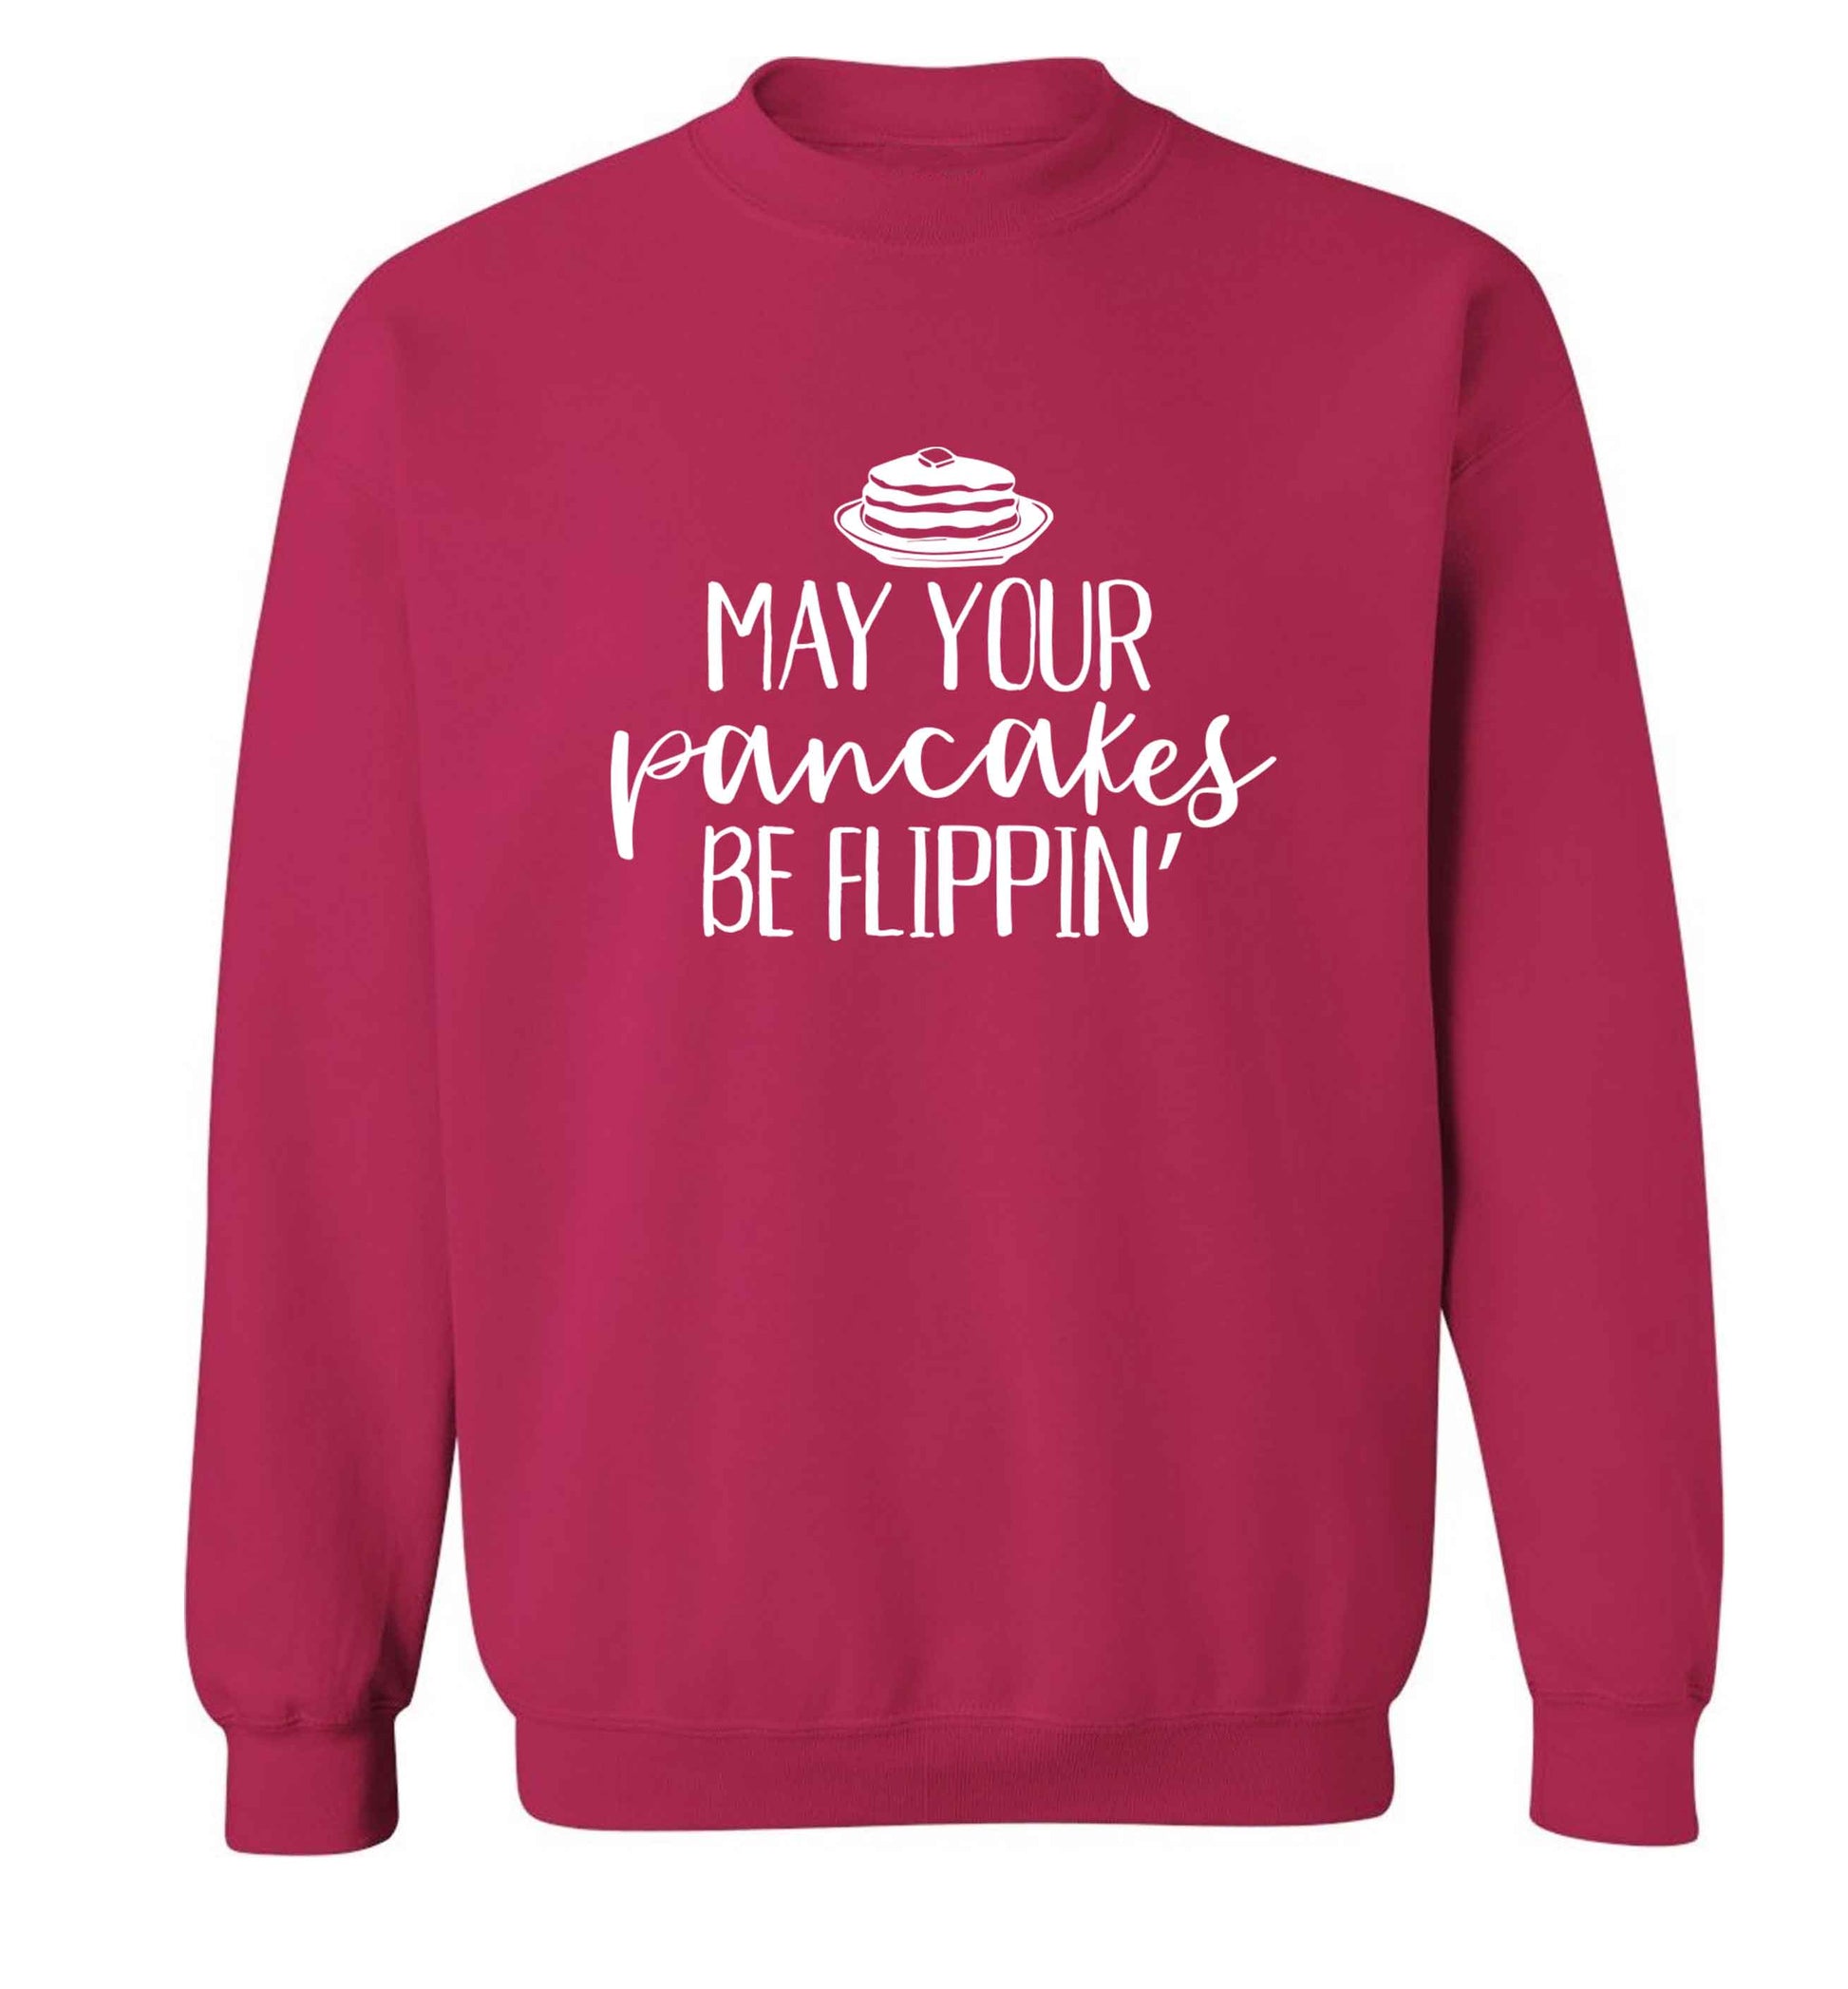 May your pancakes be flippin' adult's unisex pink sweater 2XL